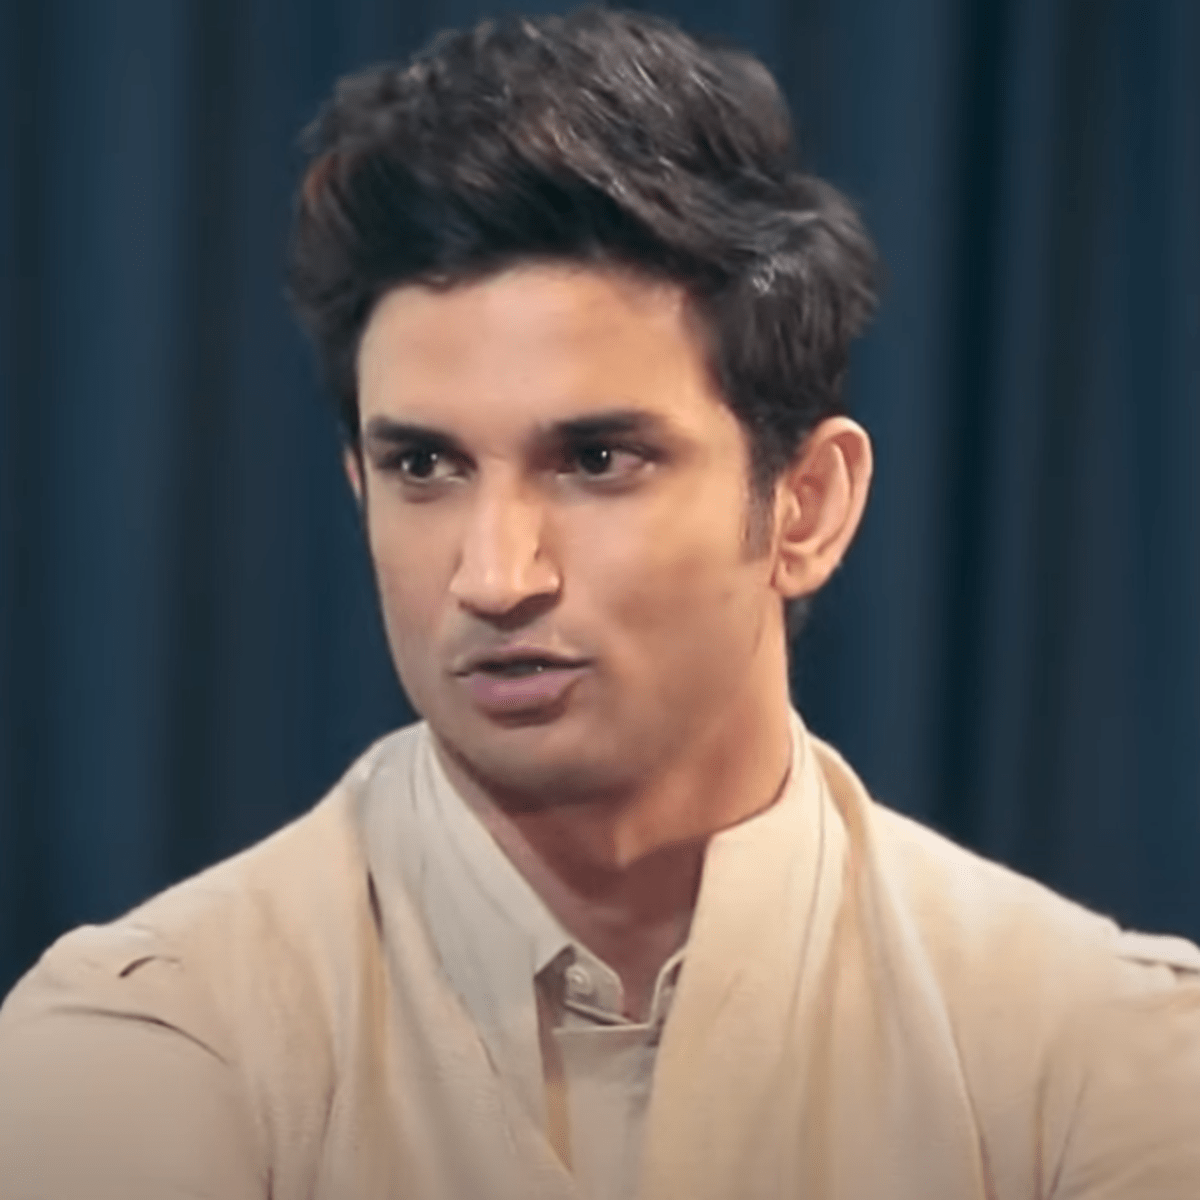 sushant singh rajput goals bucket list: Sushant Singh Rajput ticked 12 of  50 goals off his bucket list; actor was passionate about science, astronomy  - The Economic Times